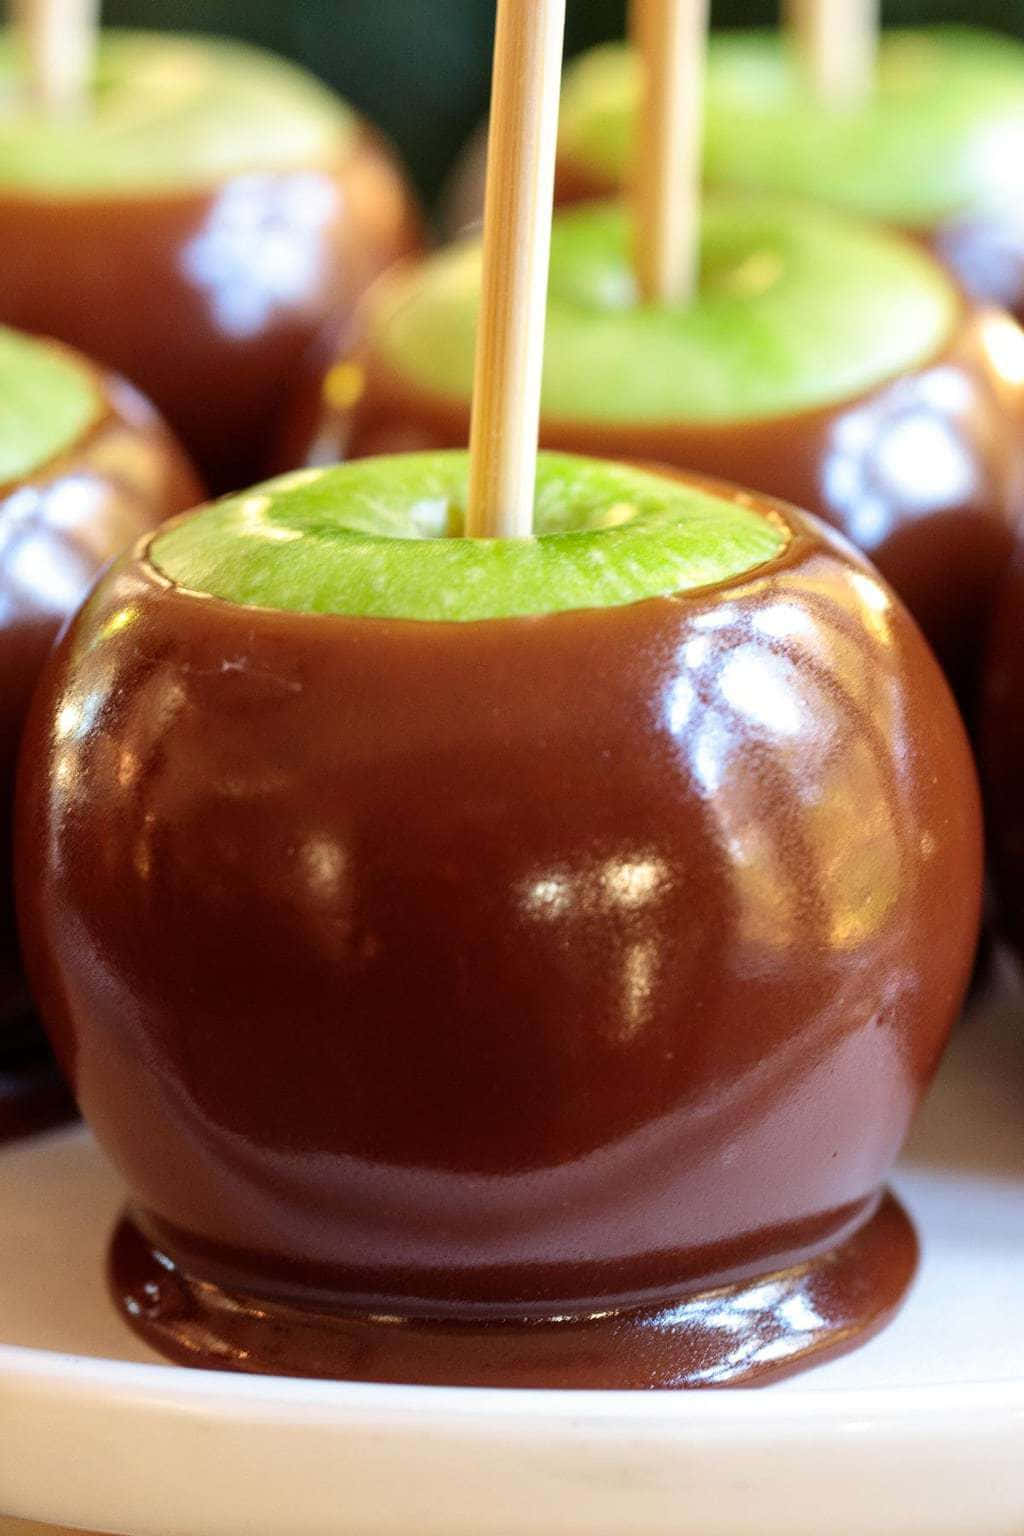 Delicious Caramel Apples with Nuts and Candy Toppings Wallpaper